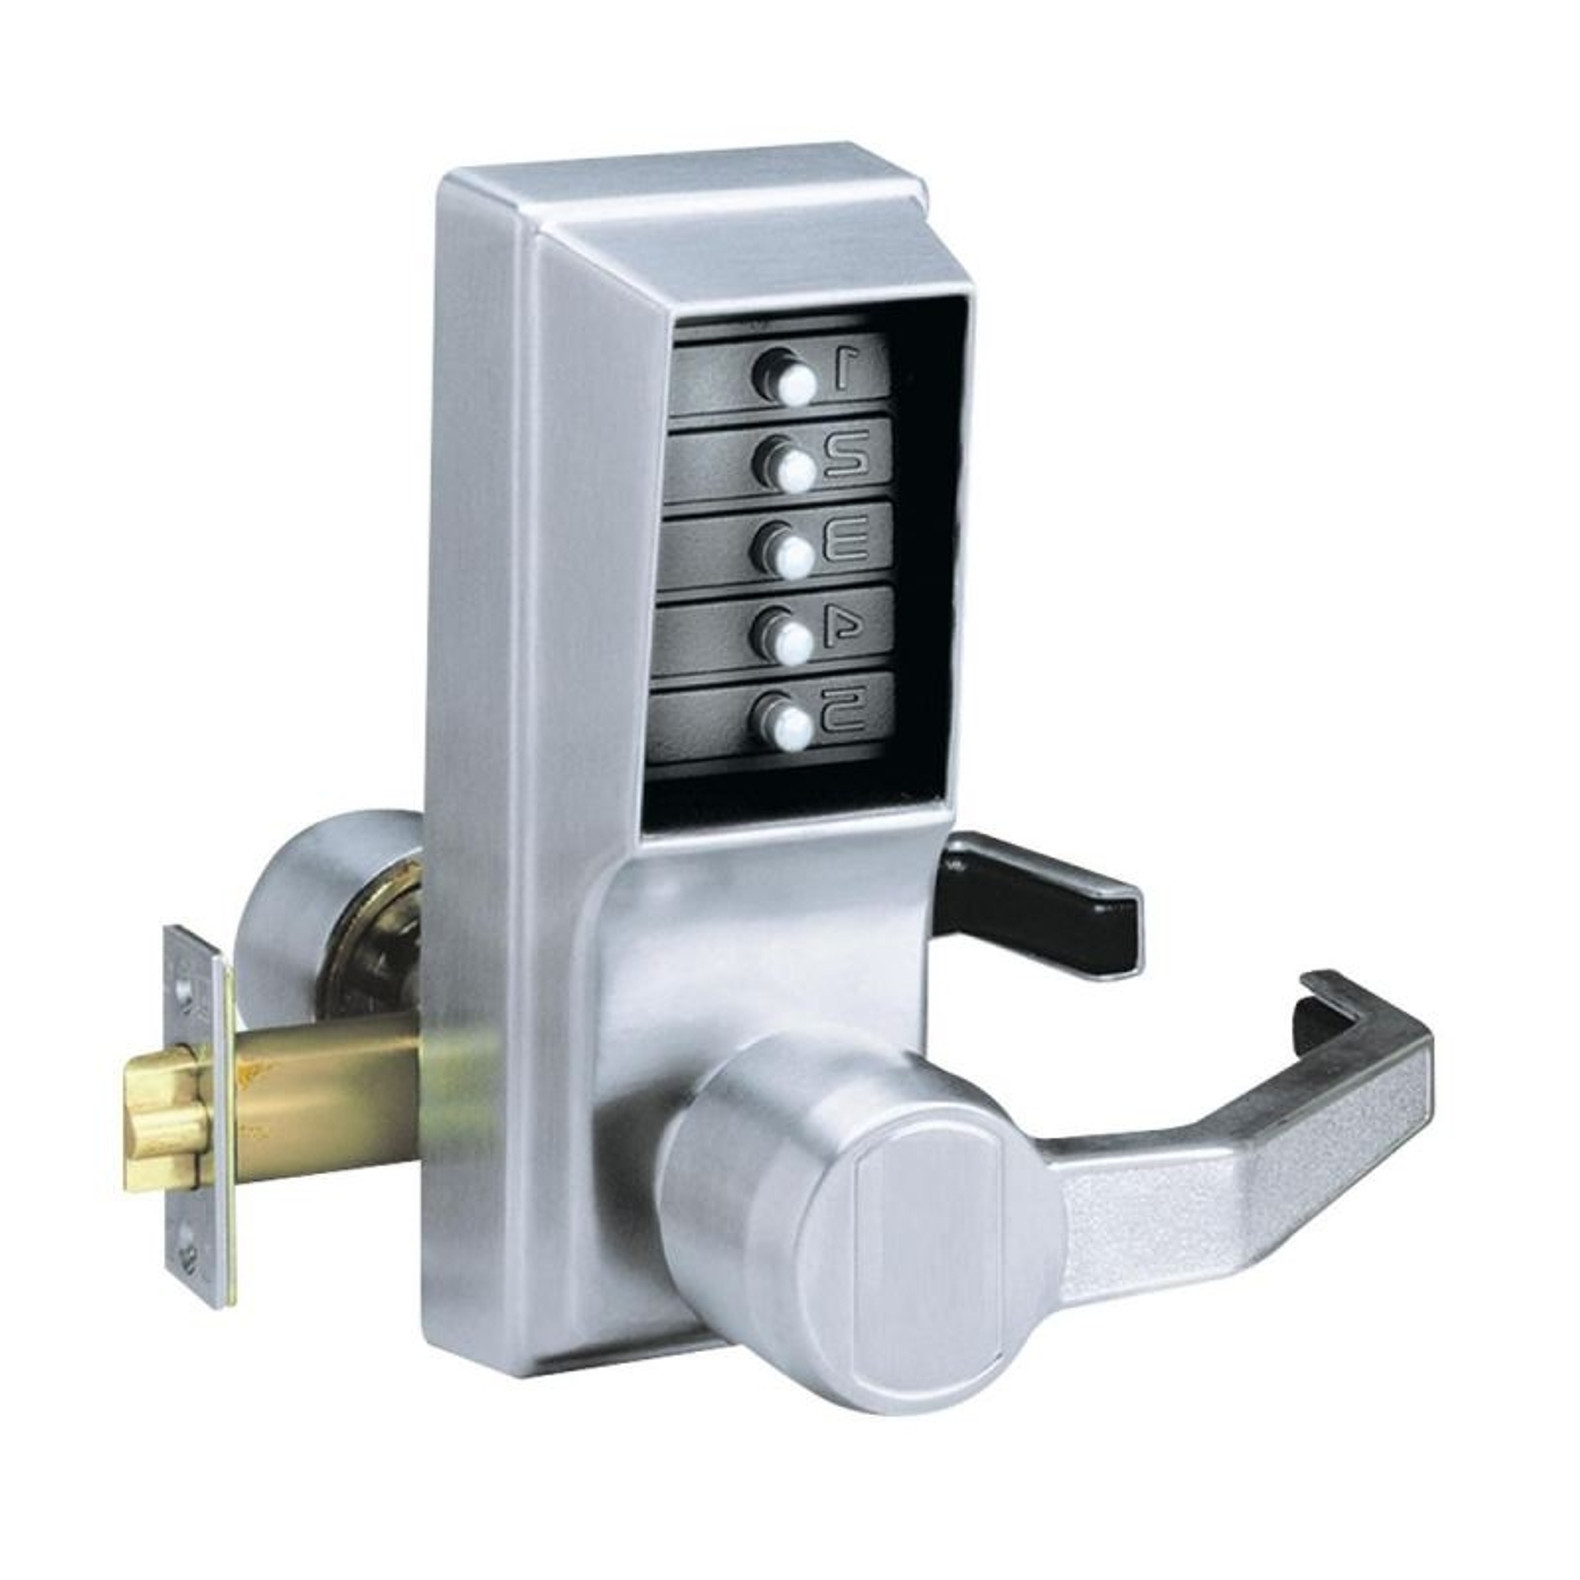 Kaba Simplex L1000 Series Metal Mechanical Pushbutton Cylindrical Lock with Lever,13mm Throw Latch, 70mm Backset, R C Schlage, Core Not Included - 5